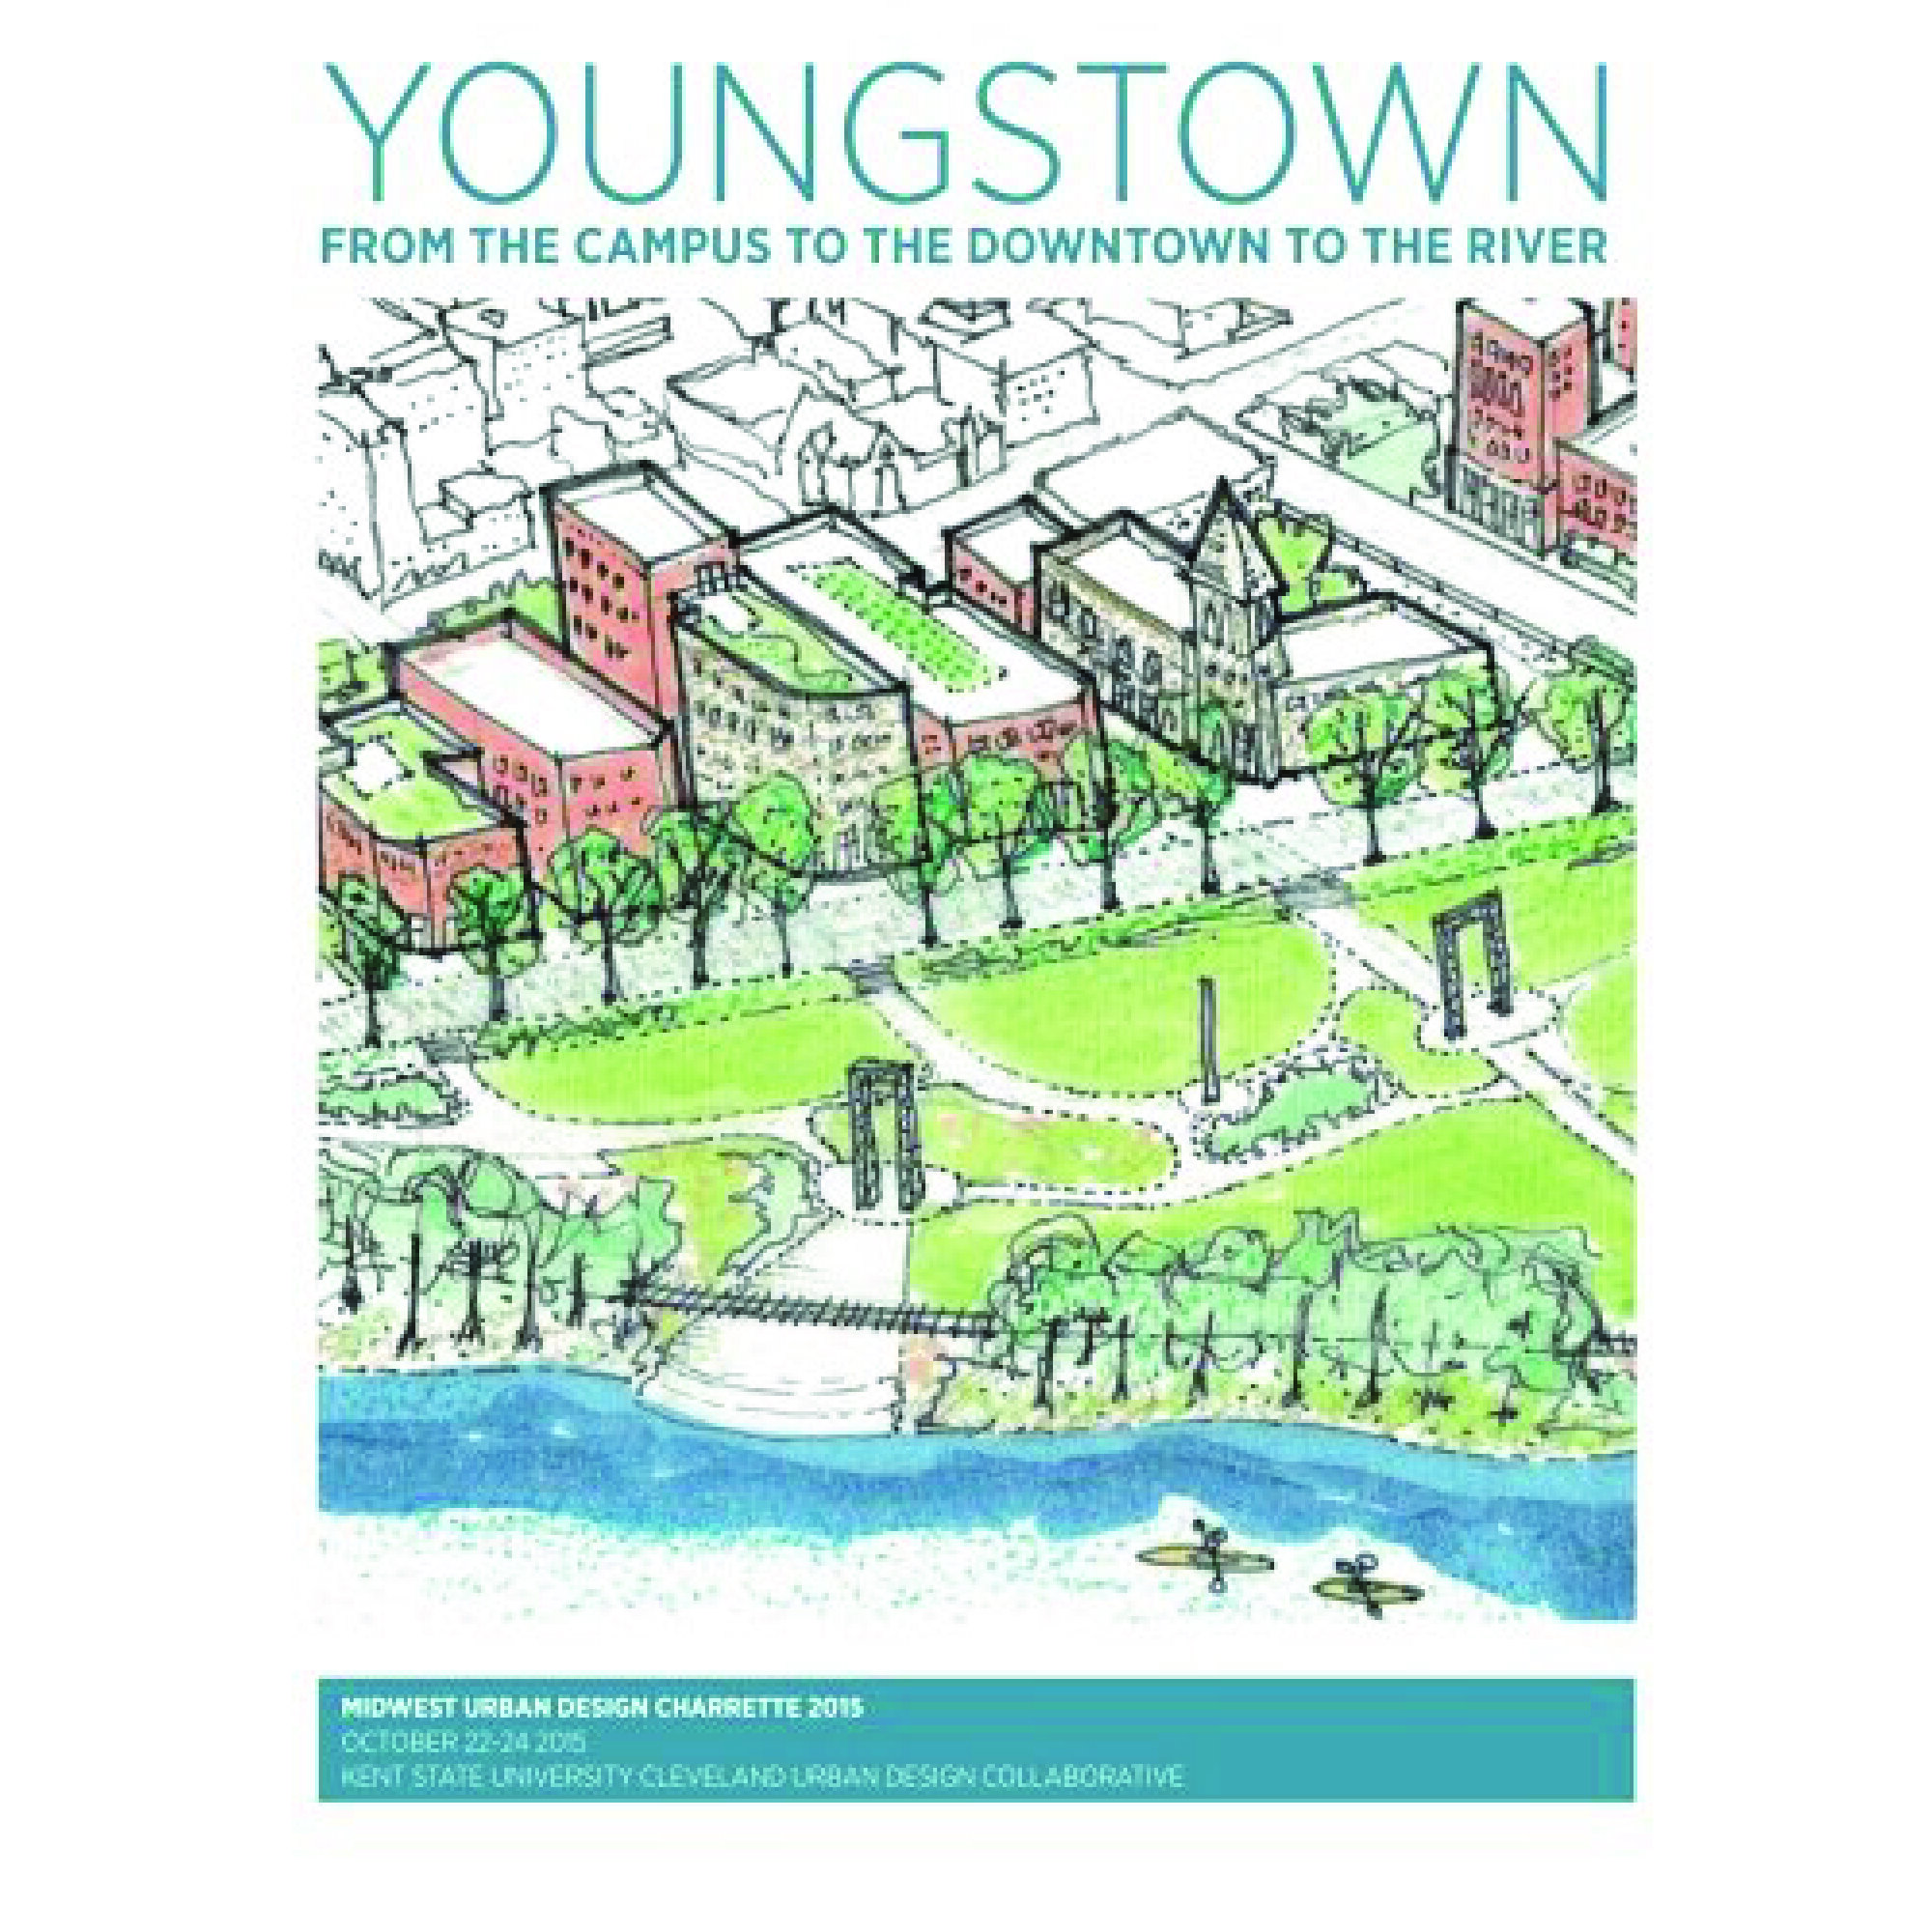 Youngstown: From Campus to Downtown to the River